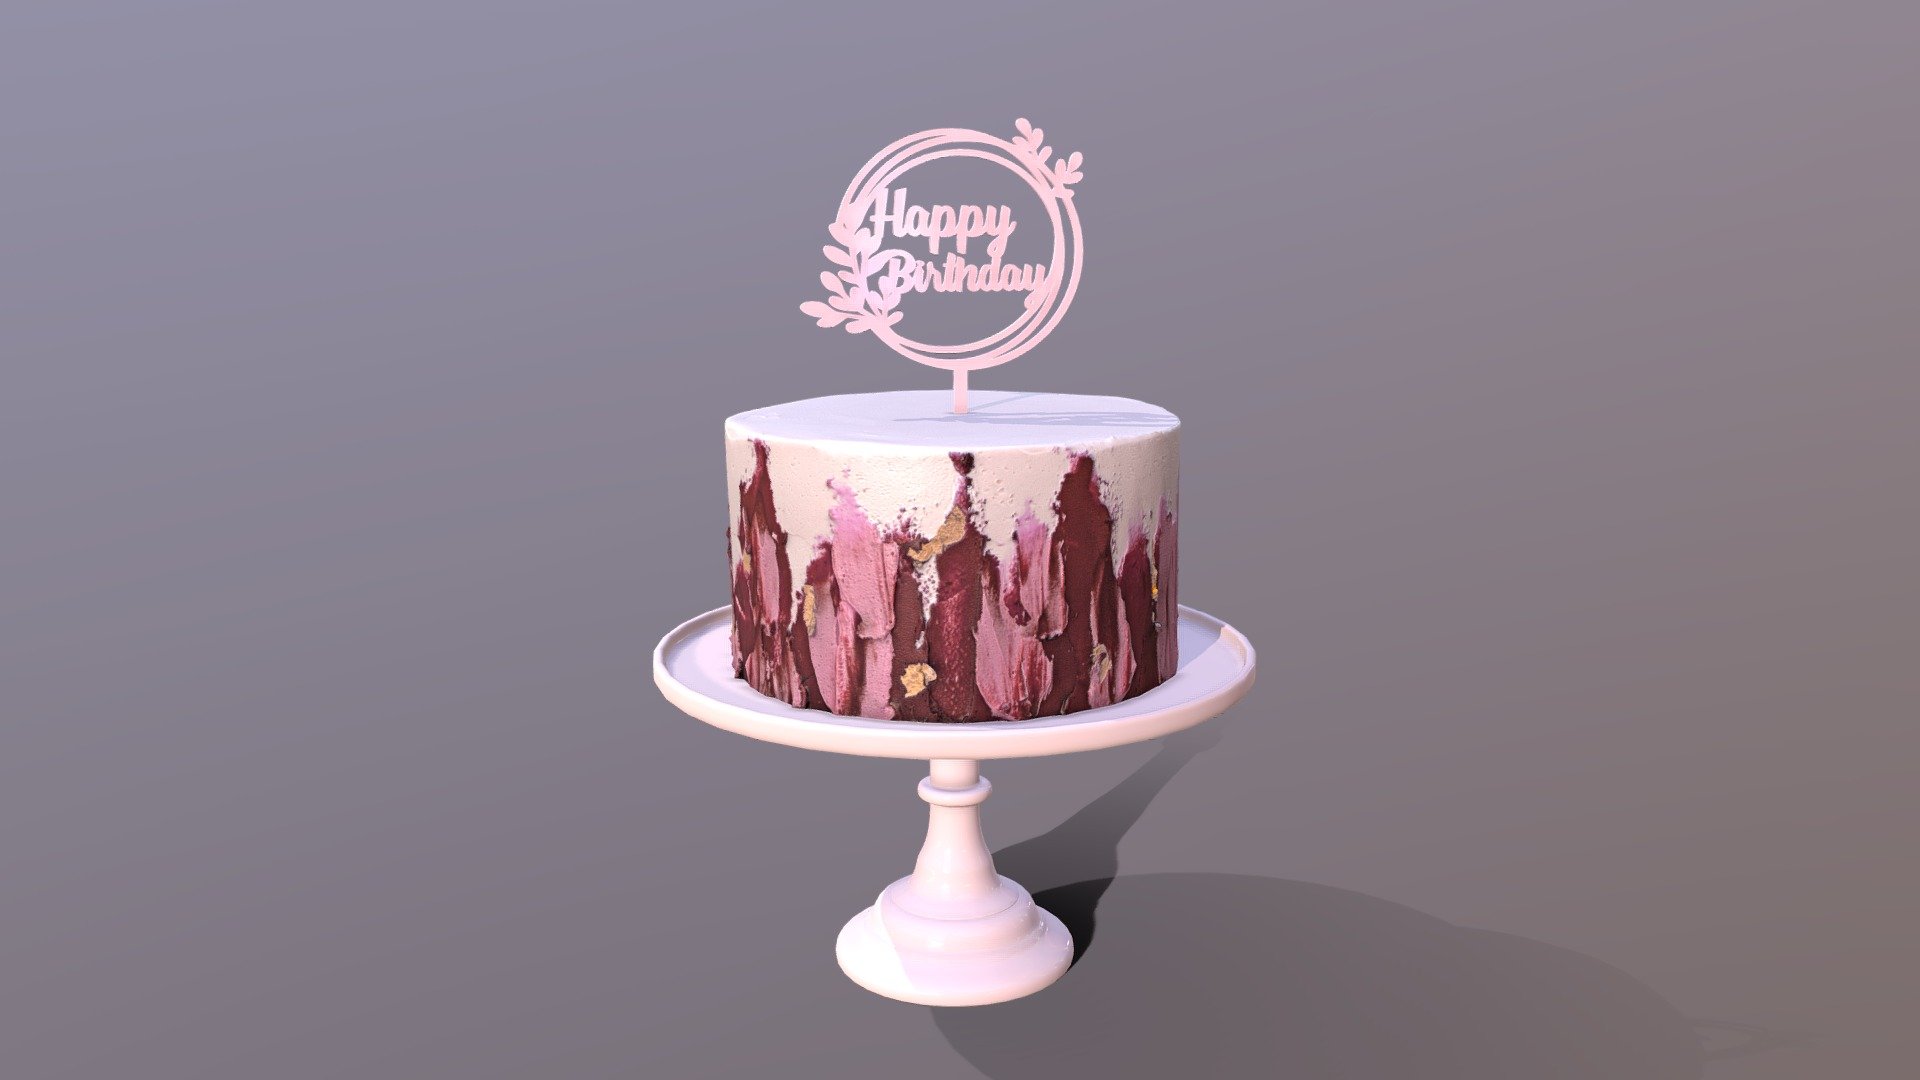 3D scan of an elegant Hibiscus Buttercream Birthday Cake on the Mosser glass stand which is made by CAKESBURG Online Premium Cake Shop in UK. You can also order real cake from this link: https://cakesburg.co.uk/products/elegant-hibiscus-buttercream-cake?_pos=1&amp;_sid=7620101b1&amp;_ss=r

Textures 4096*4096px PBR photoscan-based materials Base Color, Normal, Roughness, Specular, AO) - Elegant Hibiscus Buttercream Birthday Cake - Buy Royalty Free 3D model by Cakesburg Premium 3D Cake Shop (@Viscom_Cakesburg) 3d model